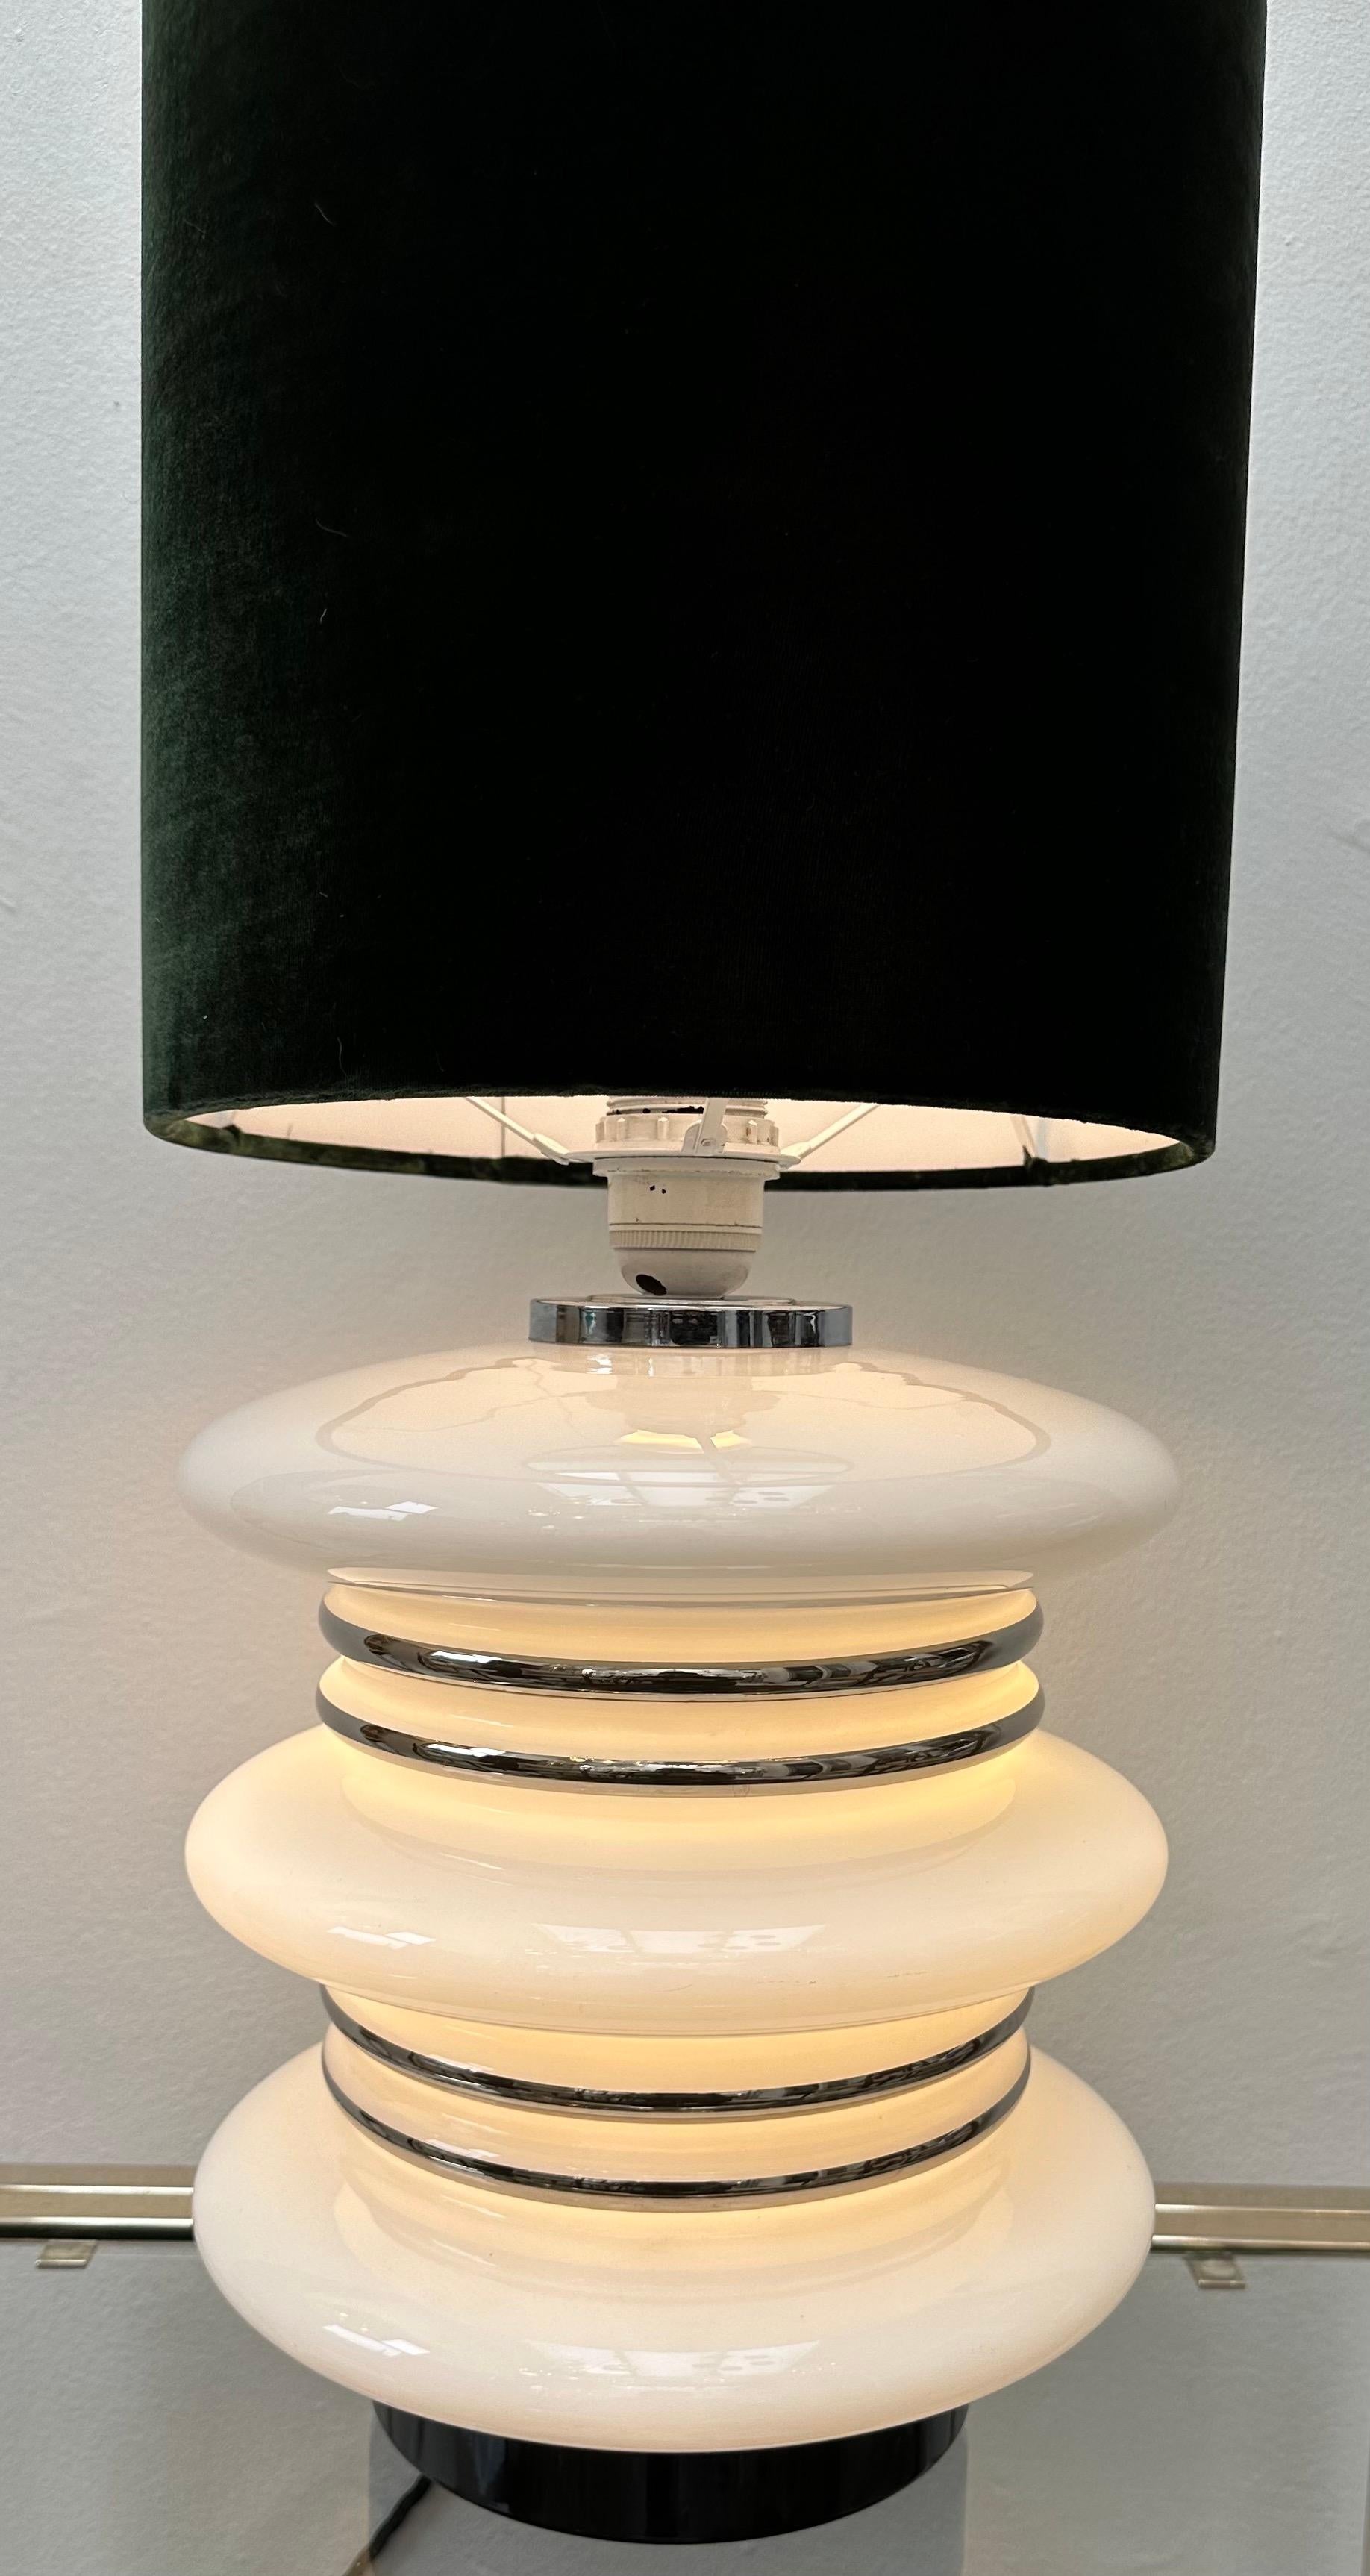 1970s German Chrome & Opal White Illuminated Glass Table Lamp Leclaire & Schäfer For Sale 4